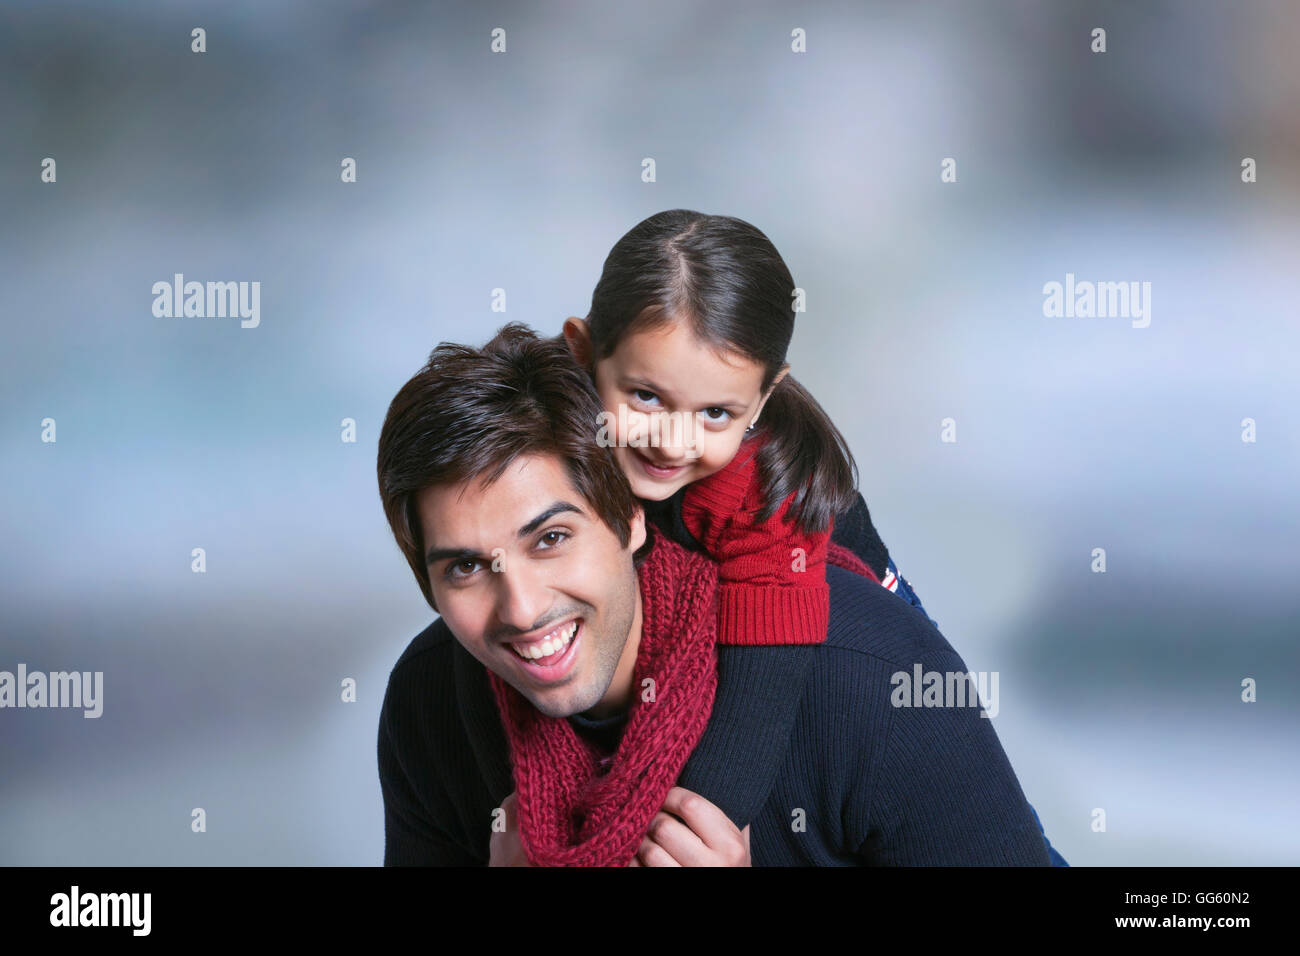 Father giving girl piggy back ride outdoors Stock Photo